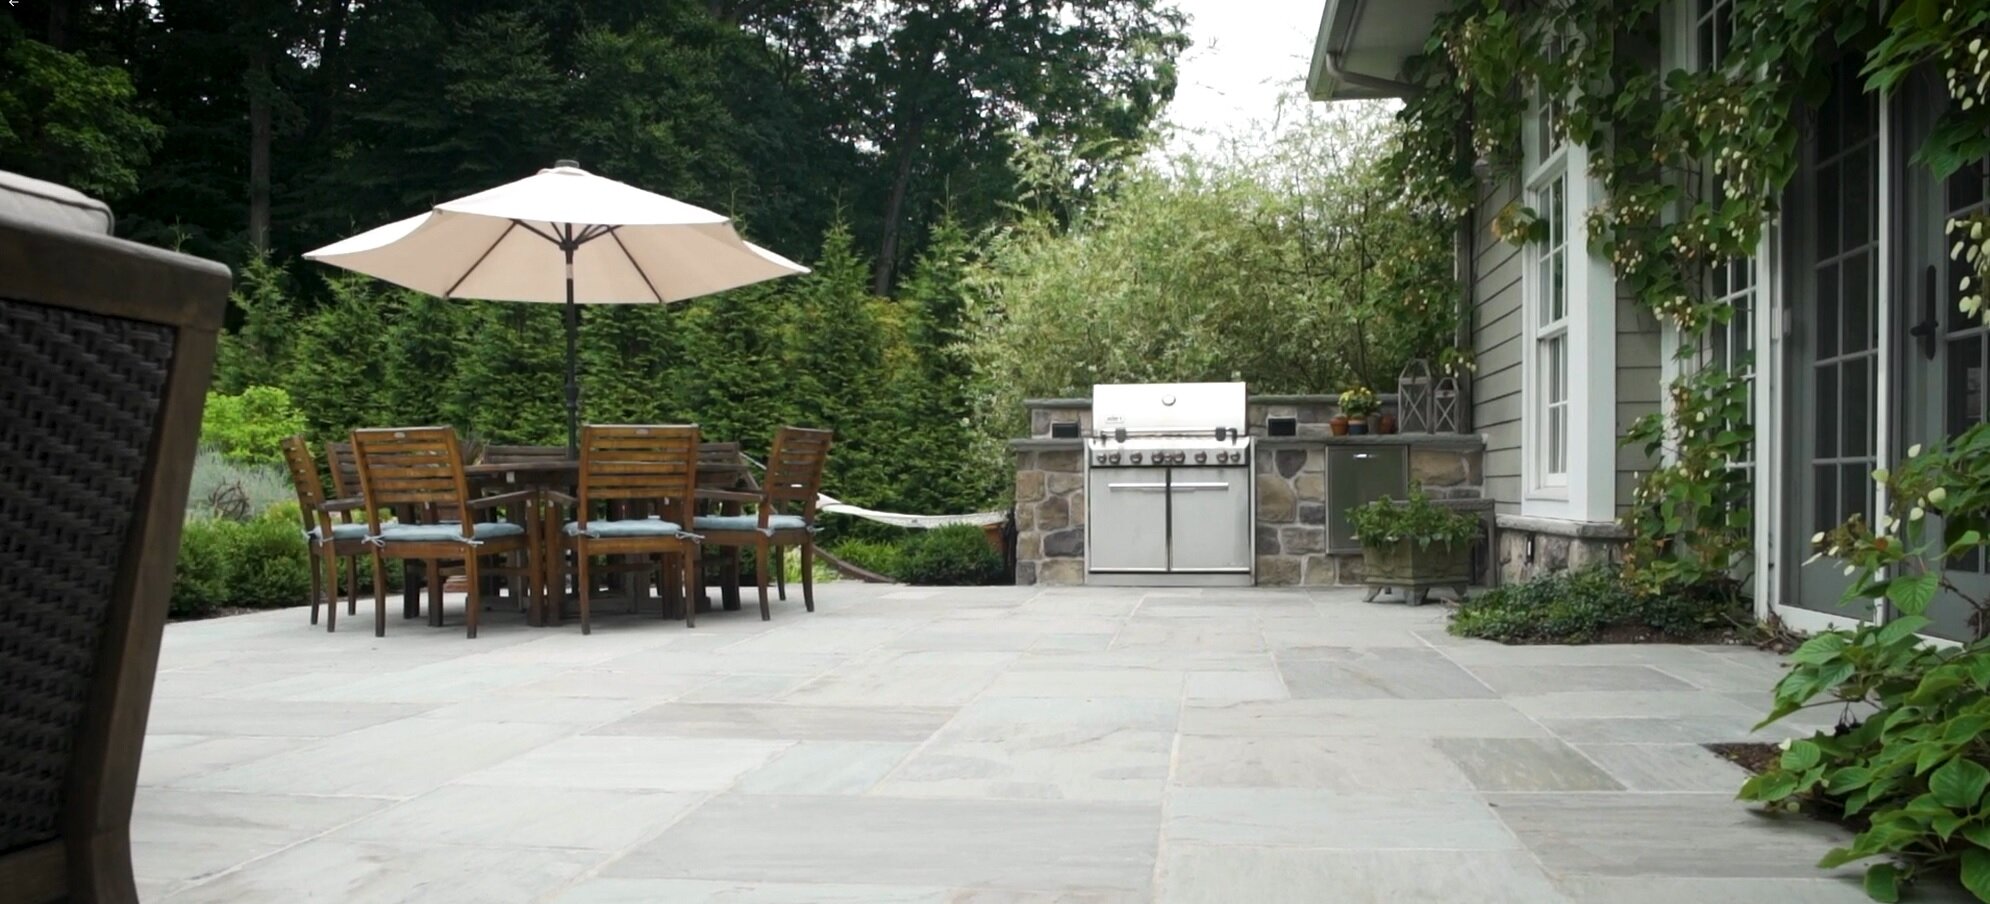 Paver patio with outdoor kitchen in Ramsey, NJ